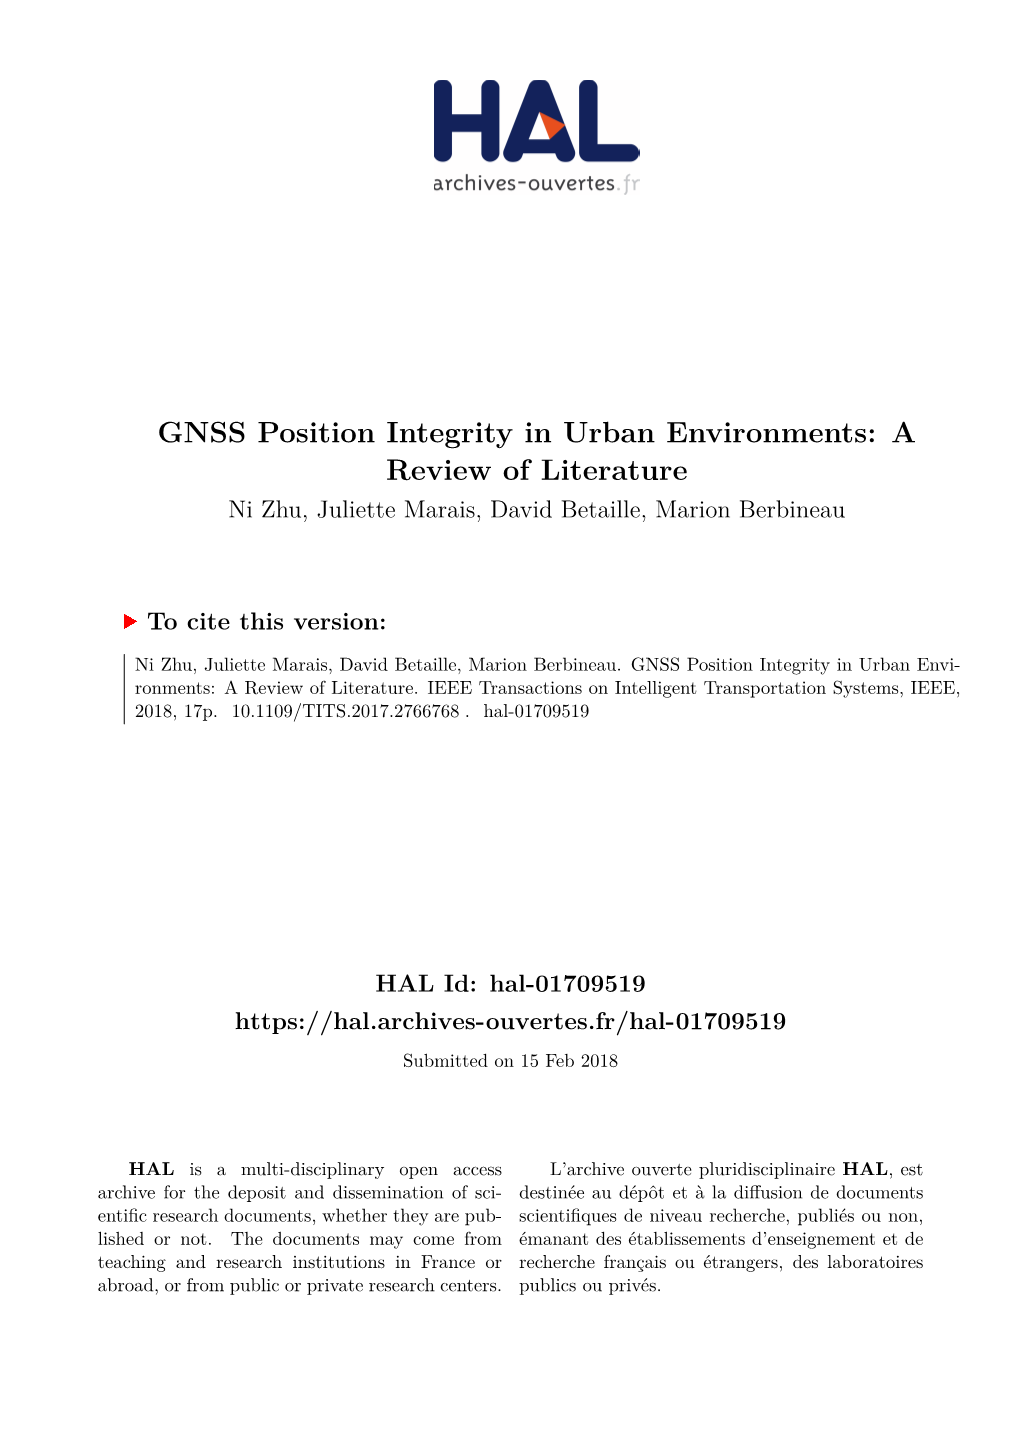 GNSS Position Integrity in Urban Environments: a Review of Literature Ni Zhu, Juliette Marais, David Betaille, Marion Berbineau